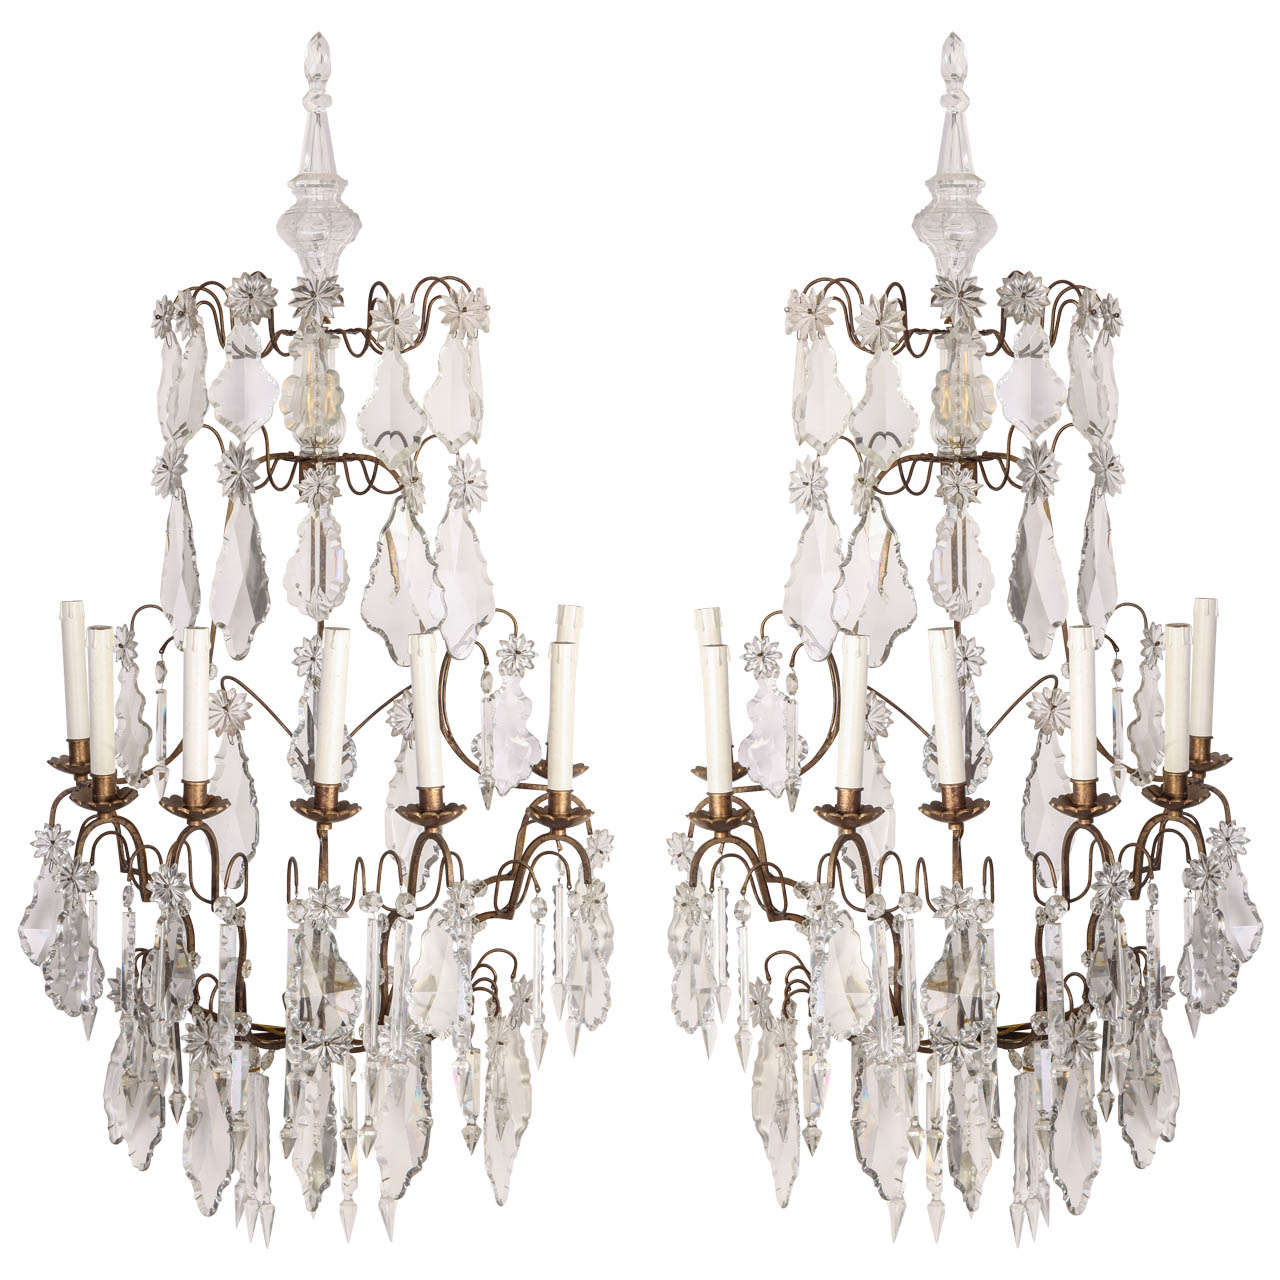  Pair of 19th century Continental Seven Branch Cut-Glass Wall Lights For Sale